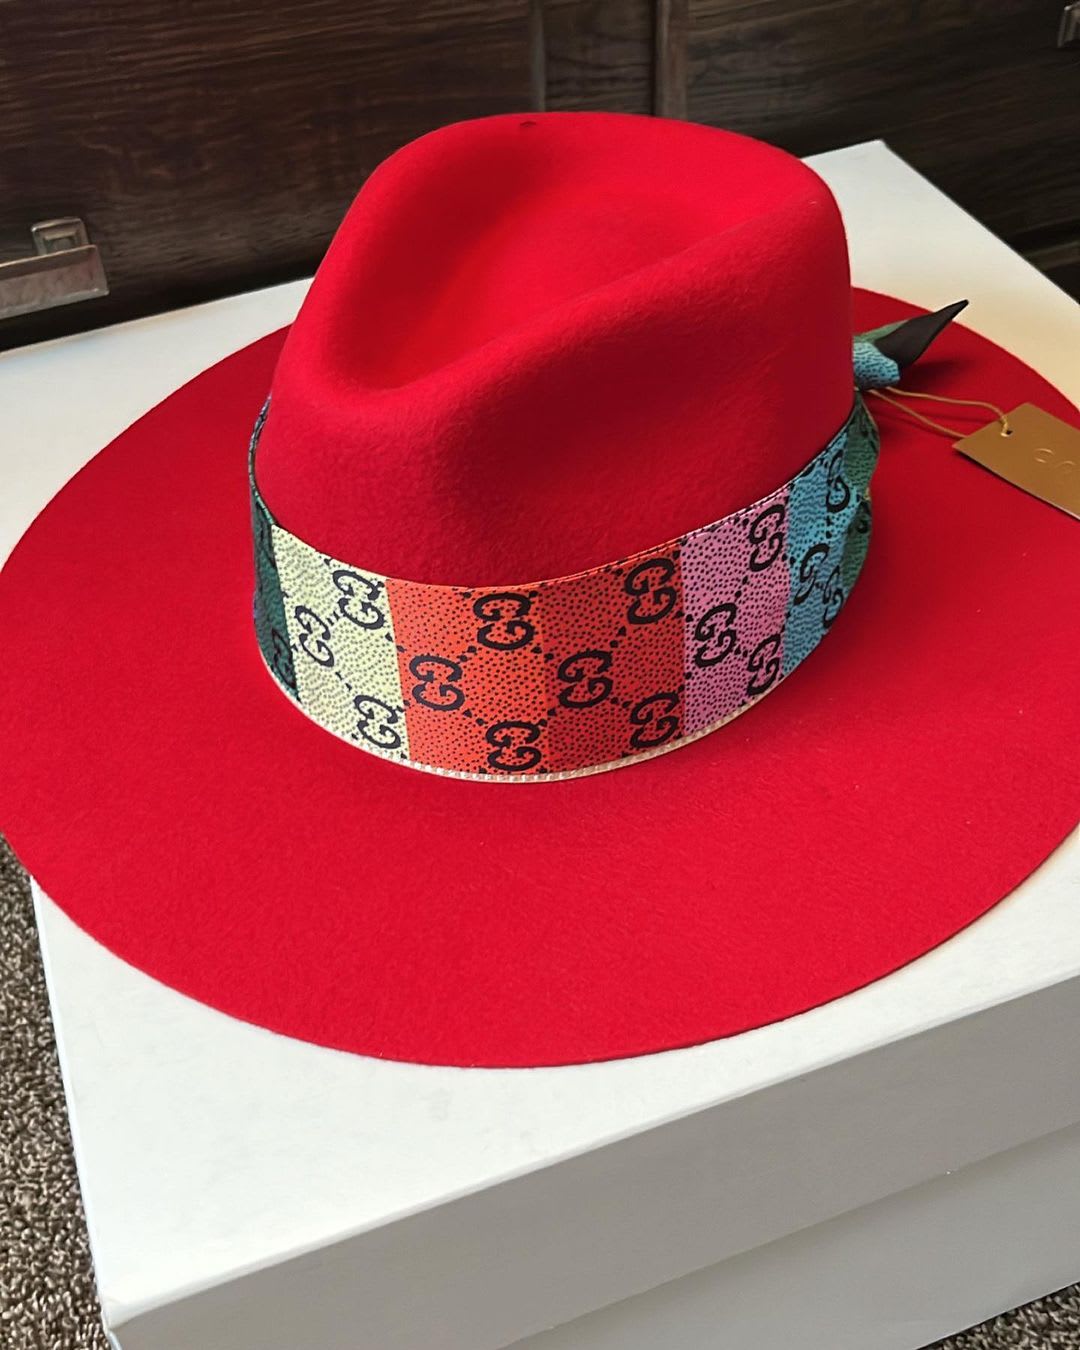 Gucci print Fedora Hat - Fedoras - Belle Ame by JJ | Fedora Hats in New York